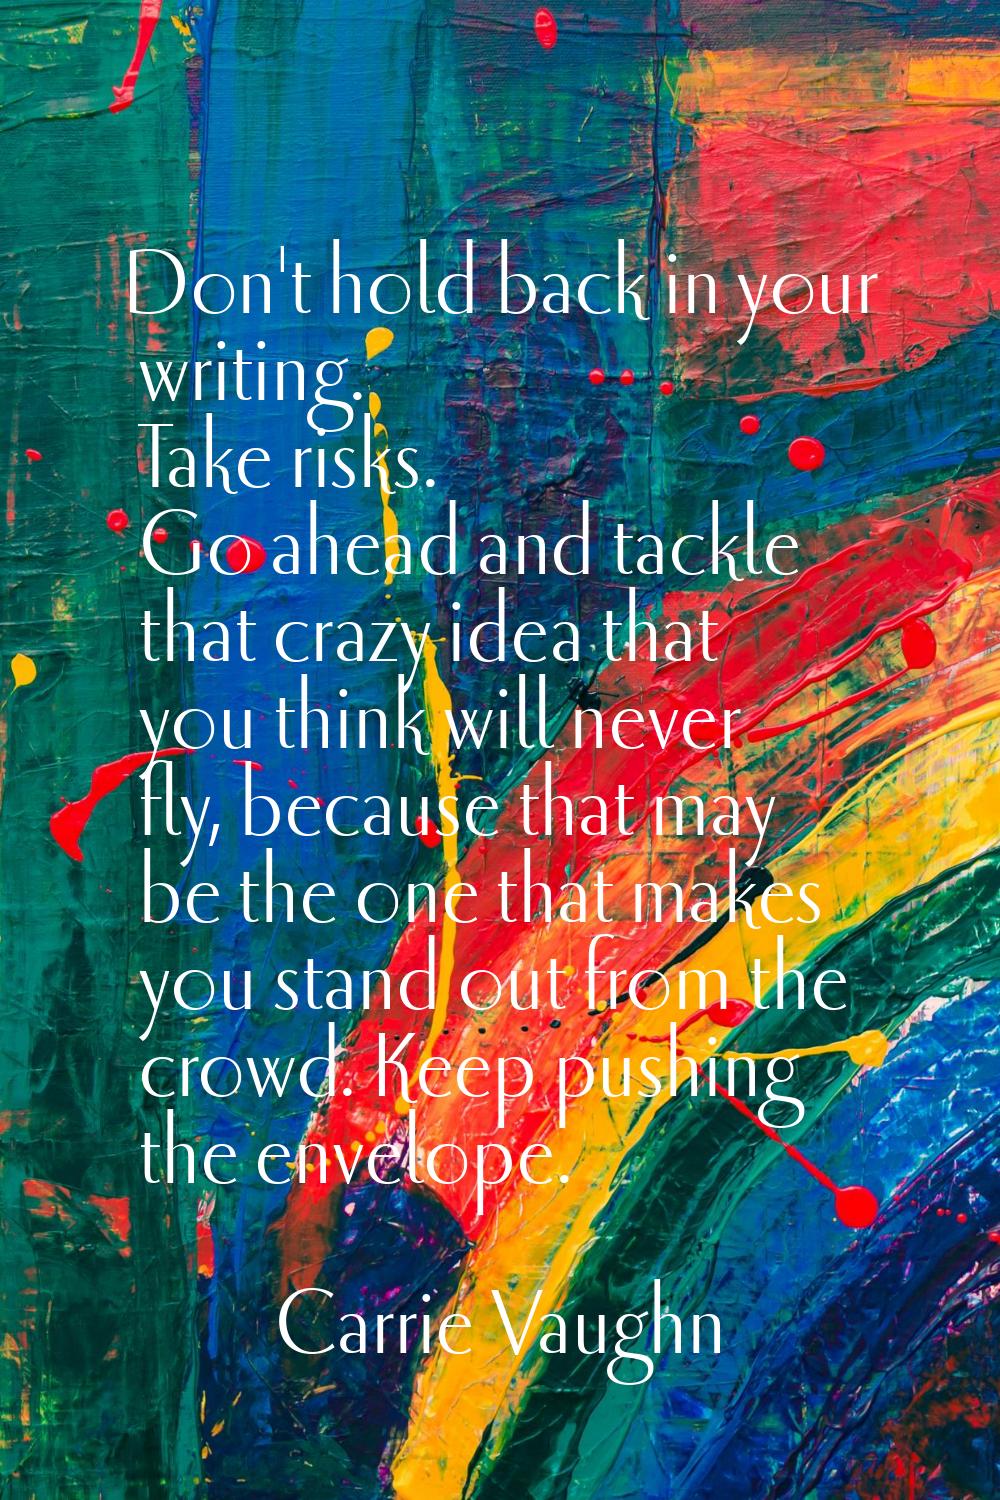 Don't hold back in your writing. Take risks. Go ahead and tackle that crazy idea that you think wil